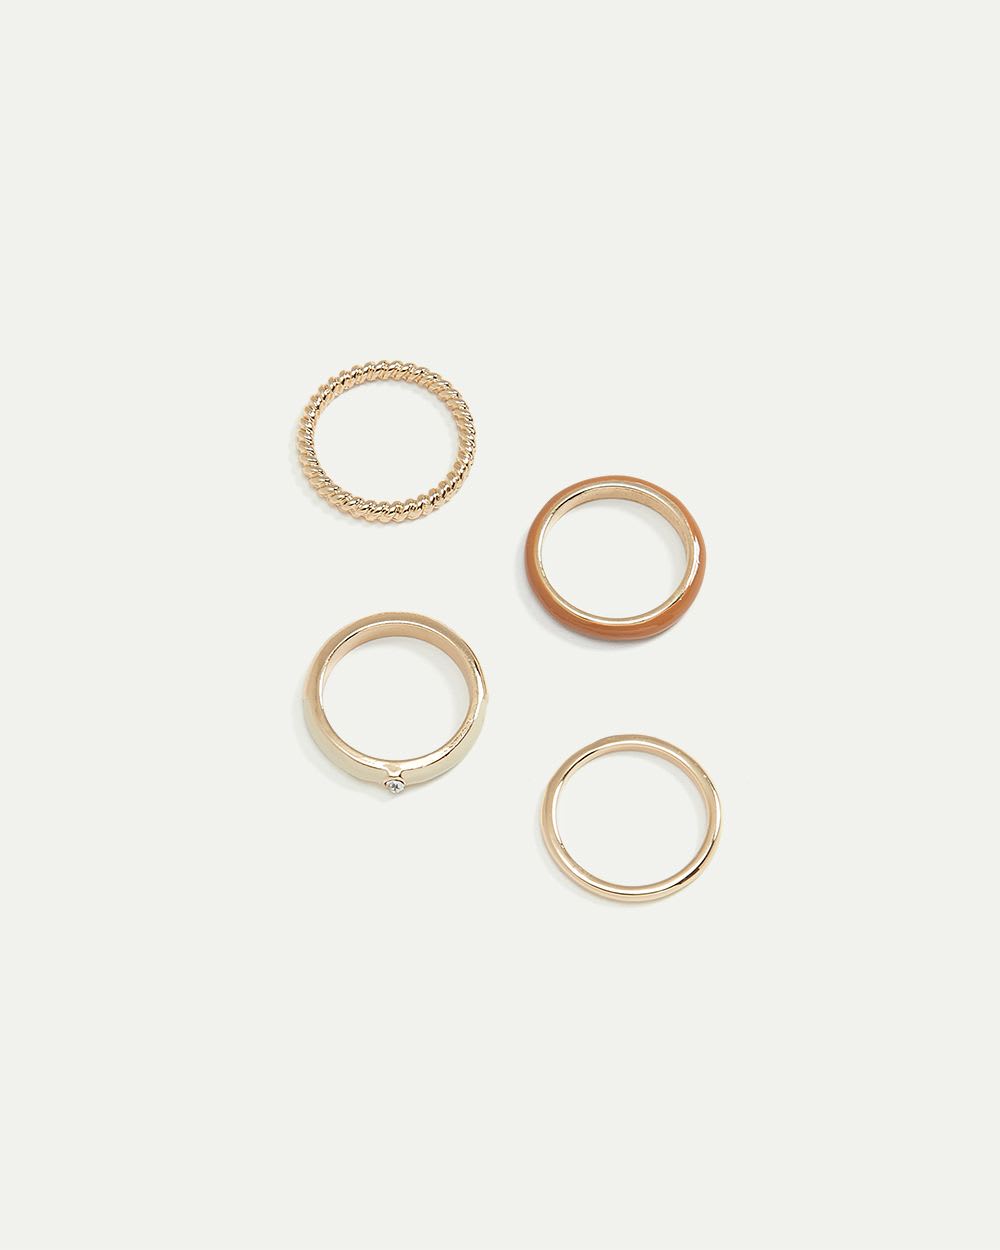 Enamel with Stone Rings - Set of 4